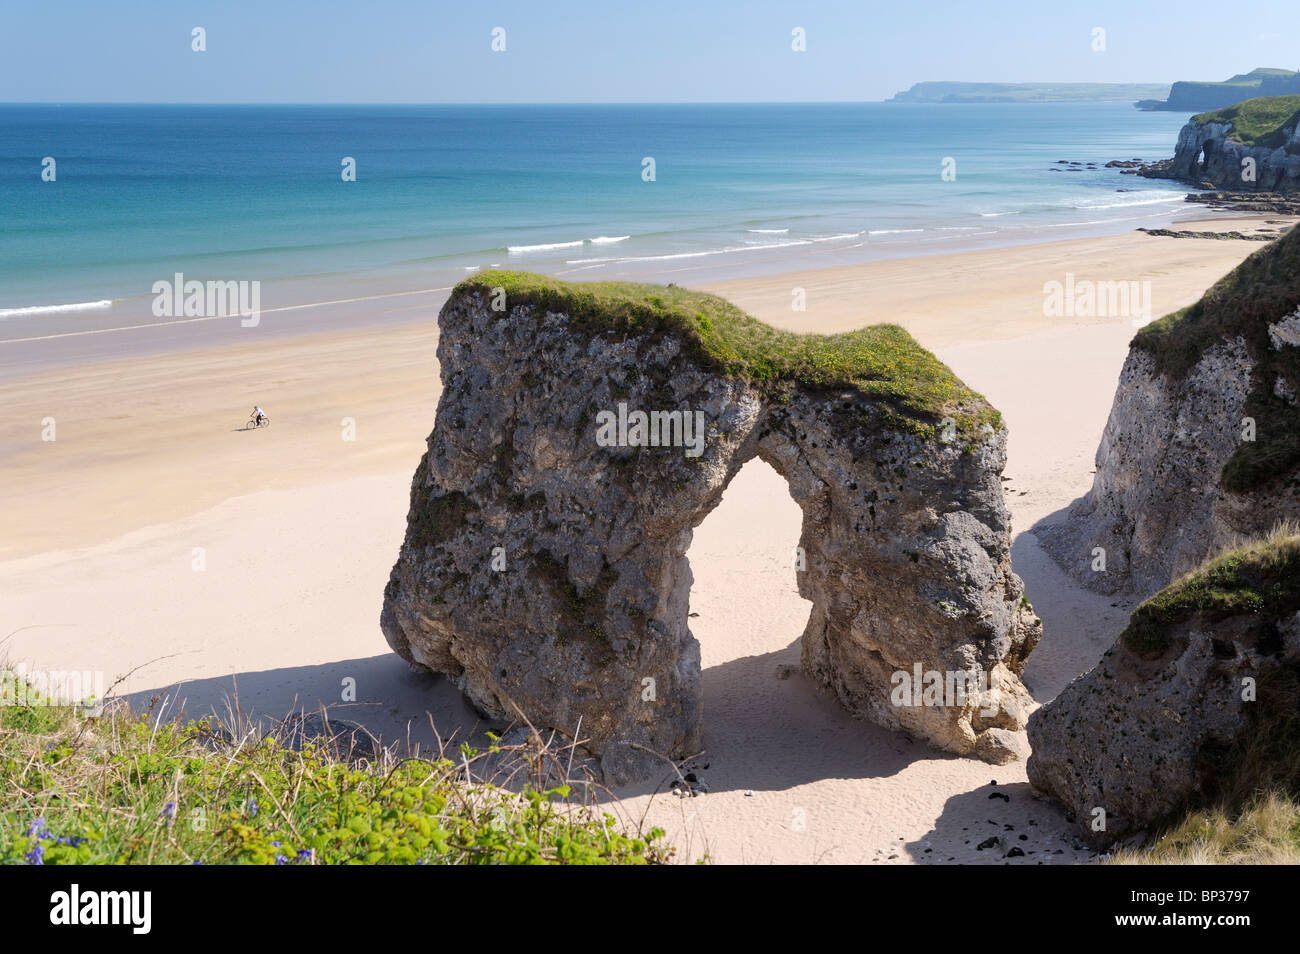 Man riding bicycle on deserted beach at the White Rocks between Portrush and Bushmills, Northern Ireland. Eroded limestone cliff Stock Photo